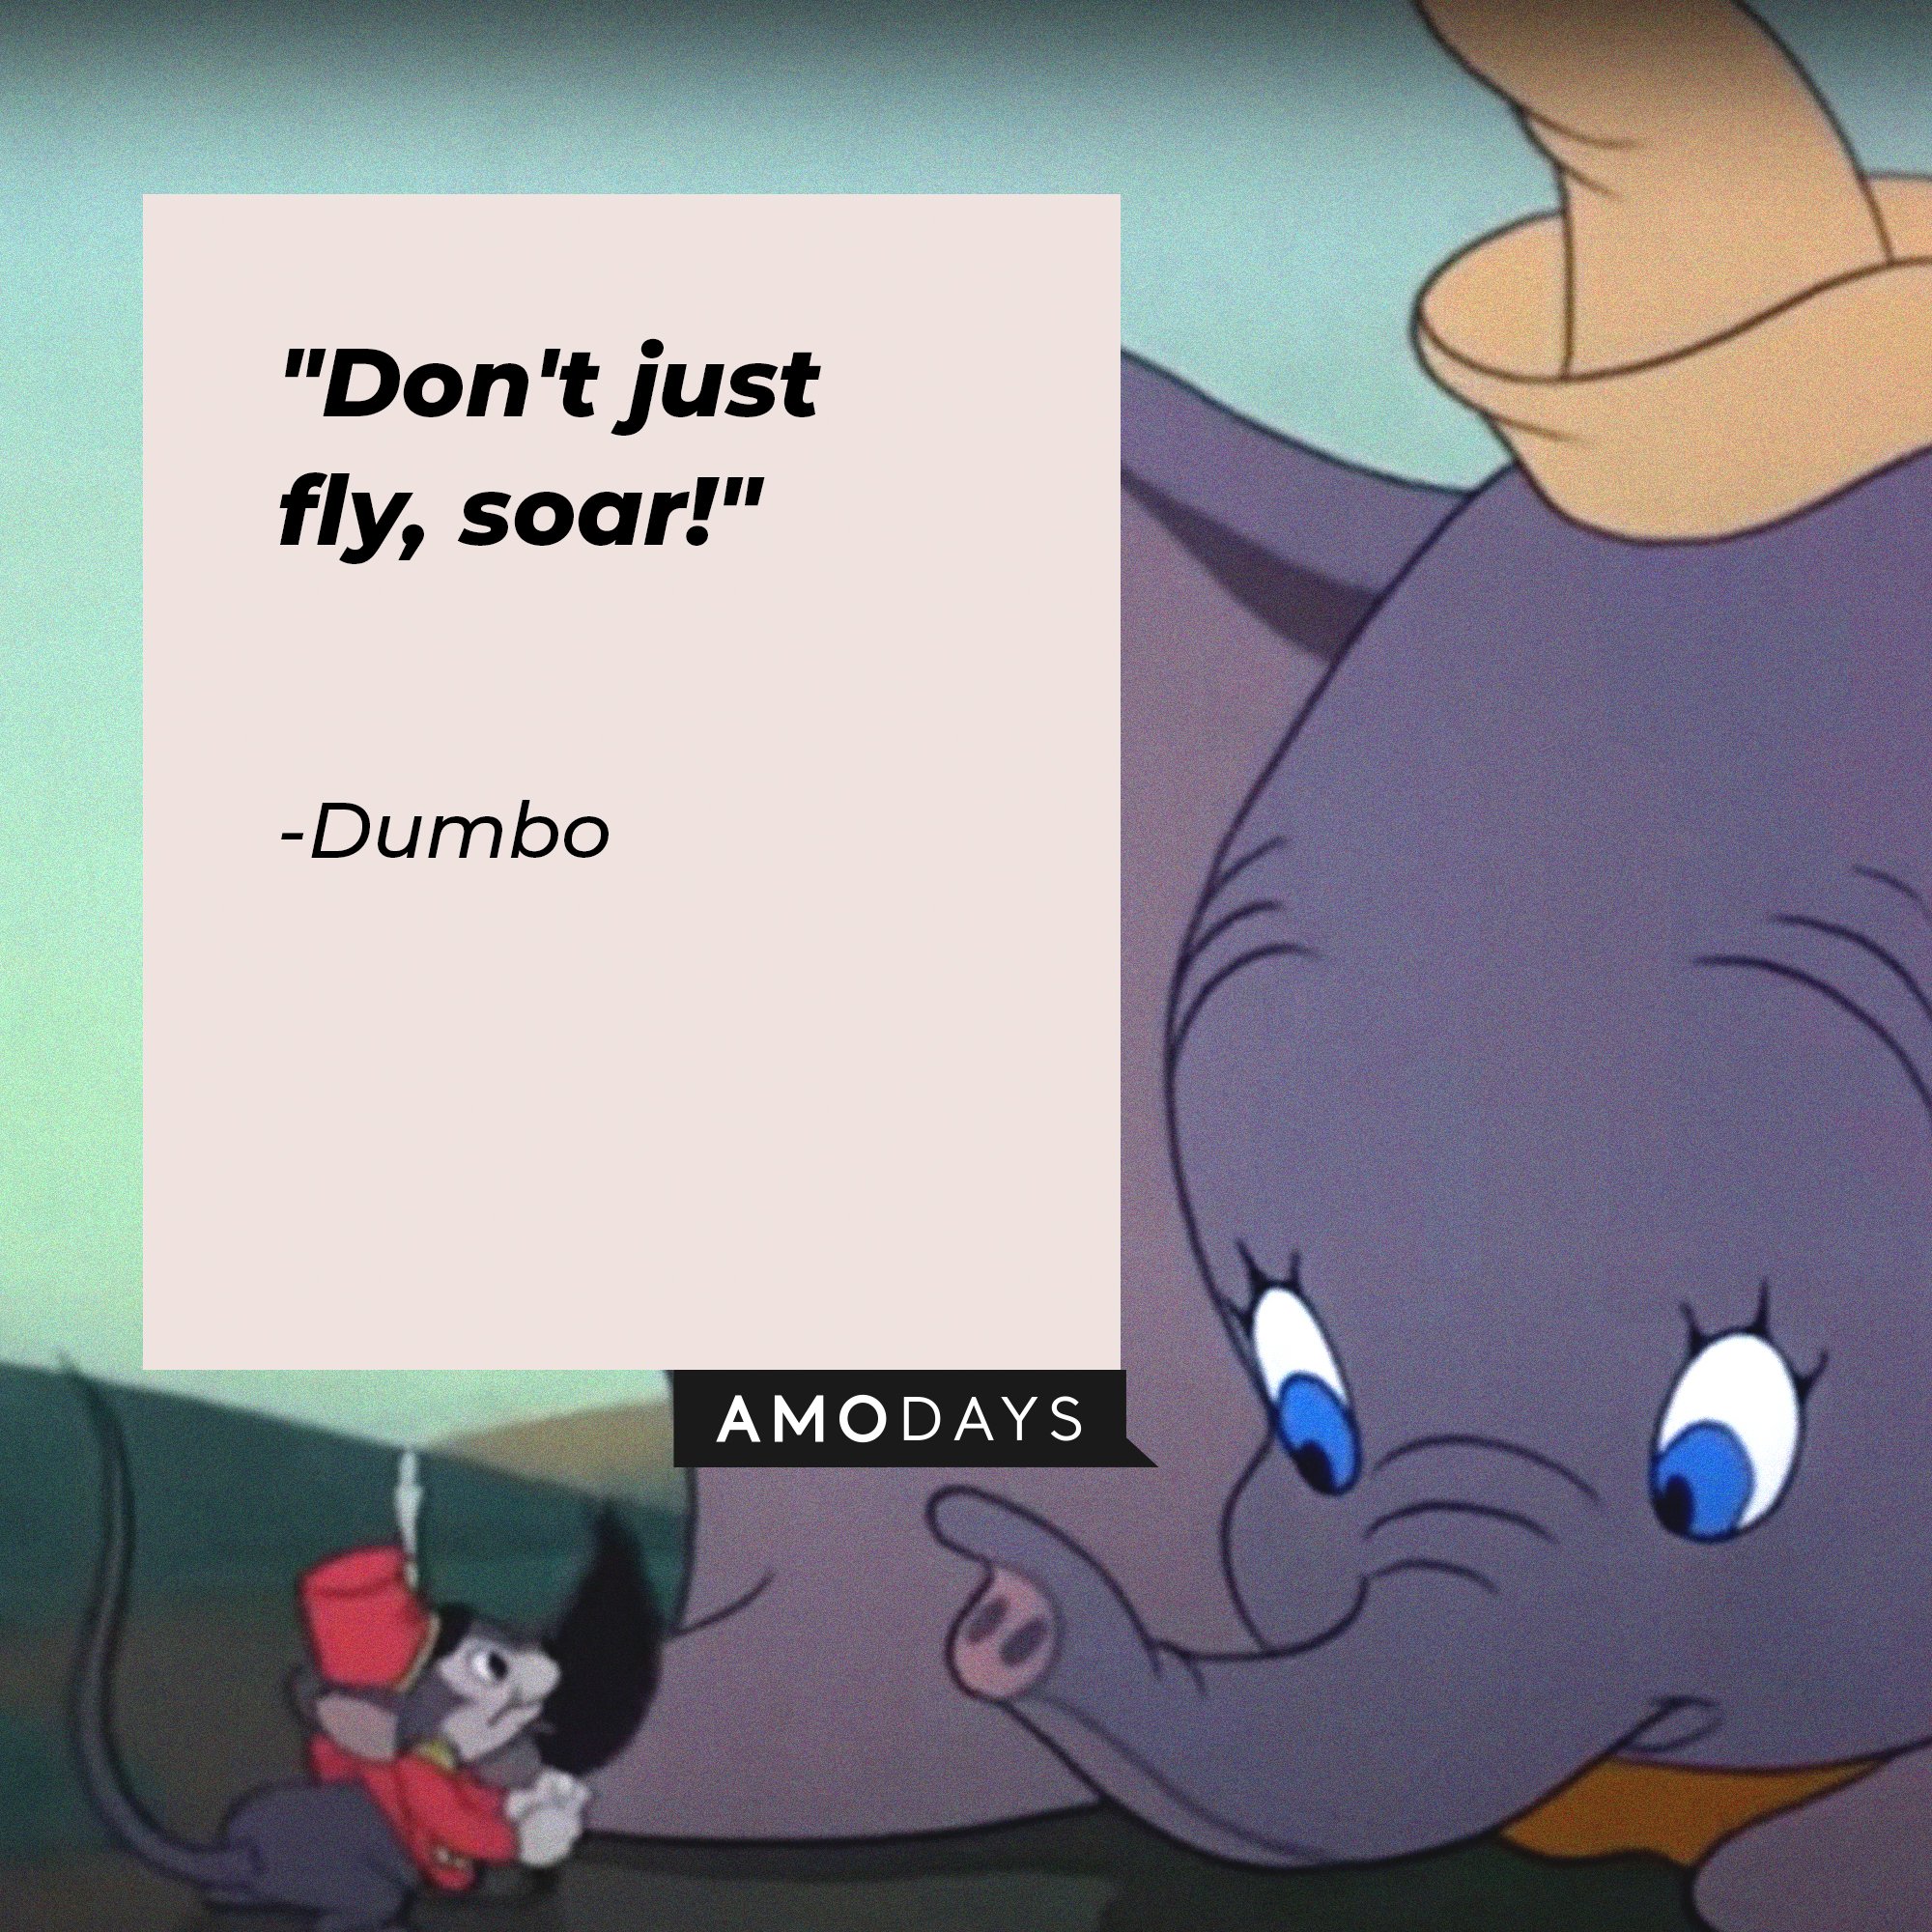  Dumbo’s quote: "Don't just fly, soar!" | Image: AmoDays    